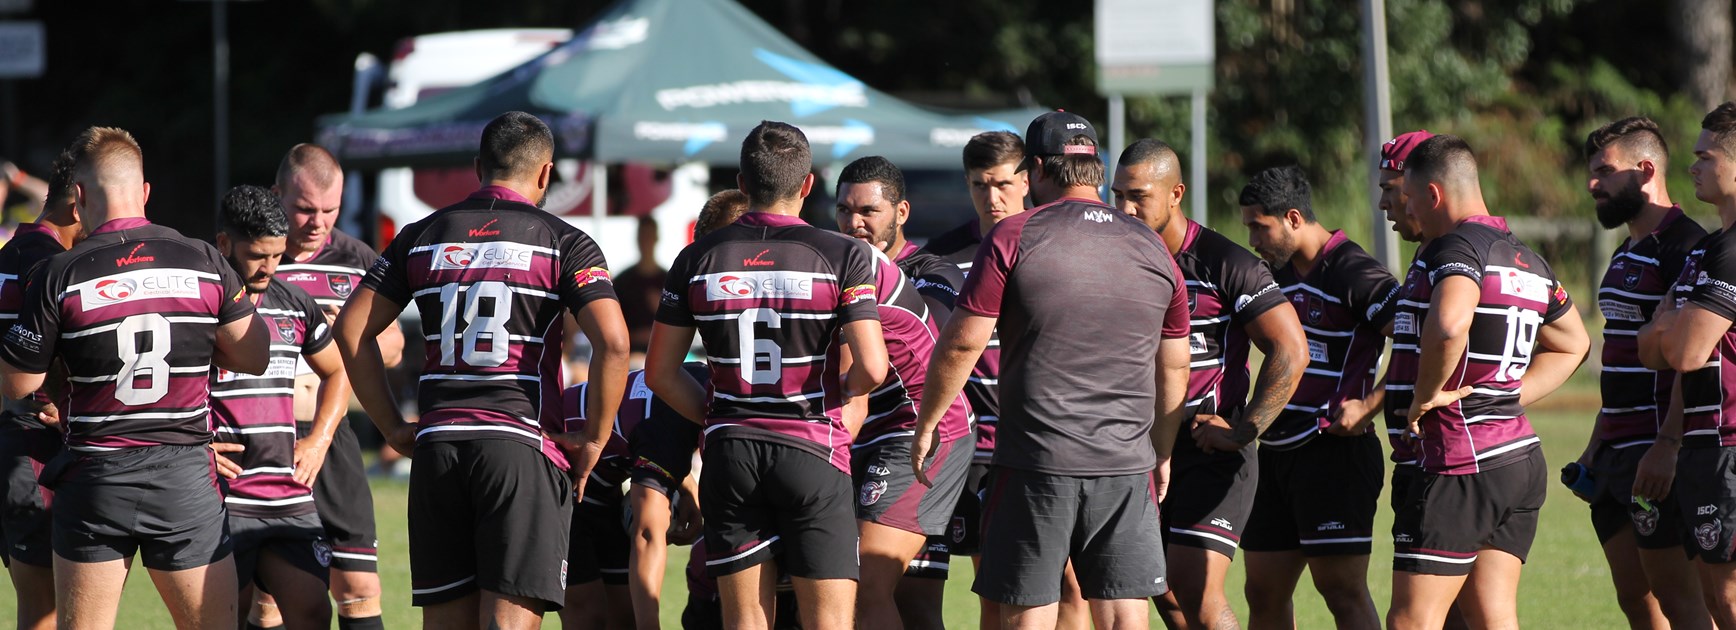 Sea Eagles out for a flying start against Magpies